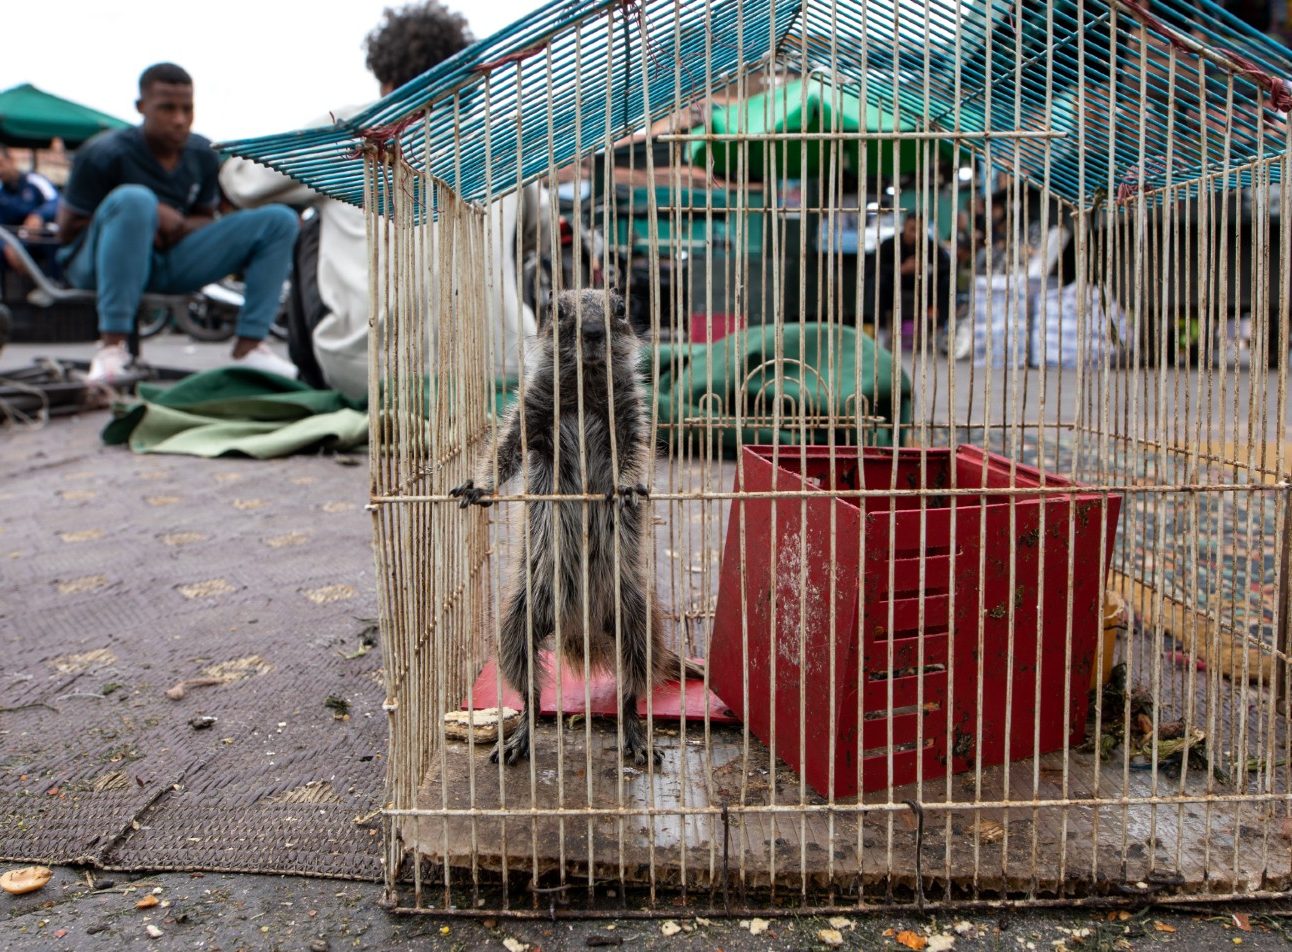 A small animal in a cage at a wildlife market